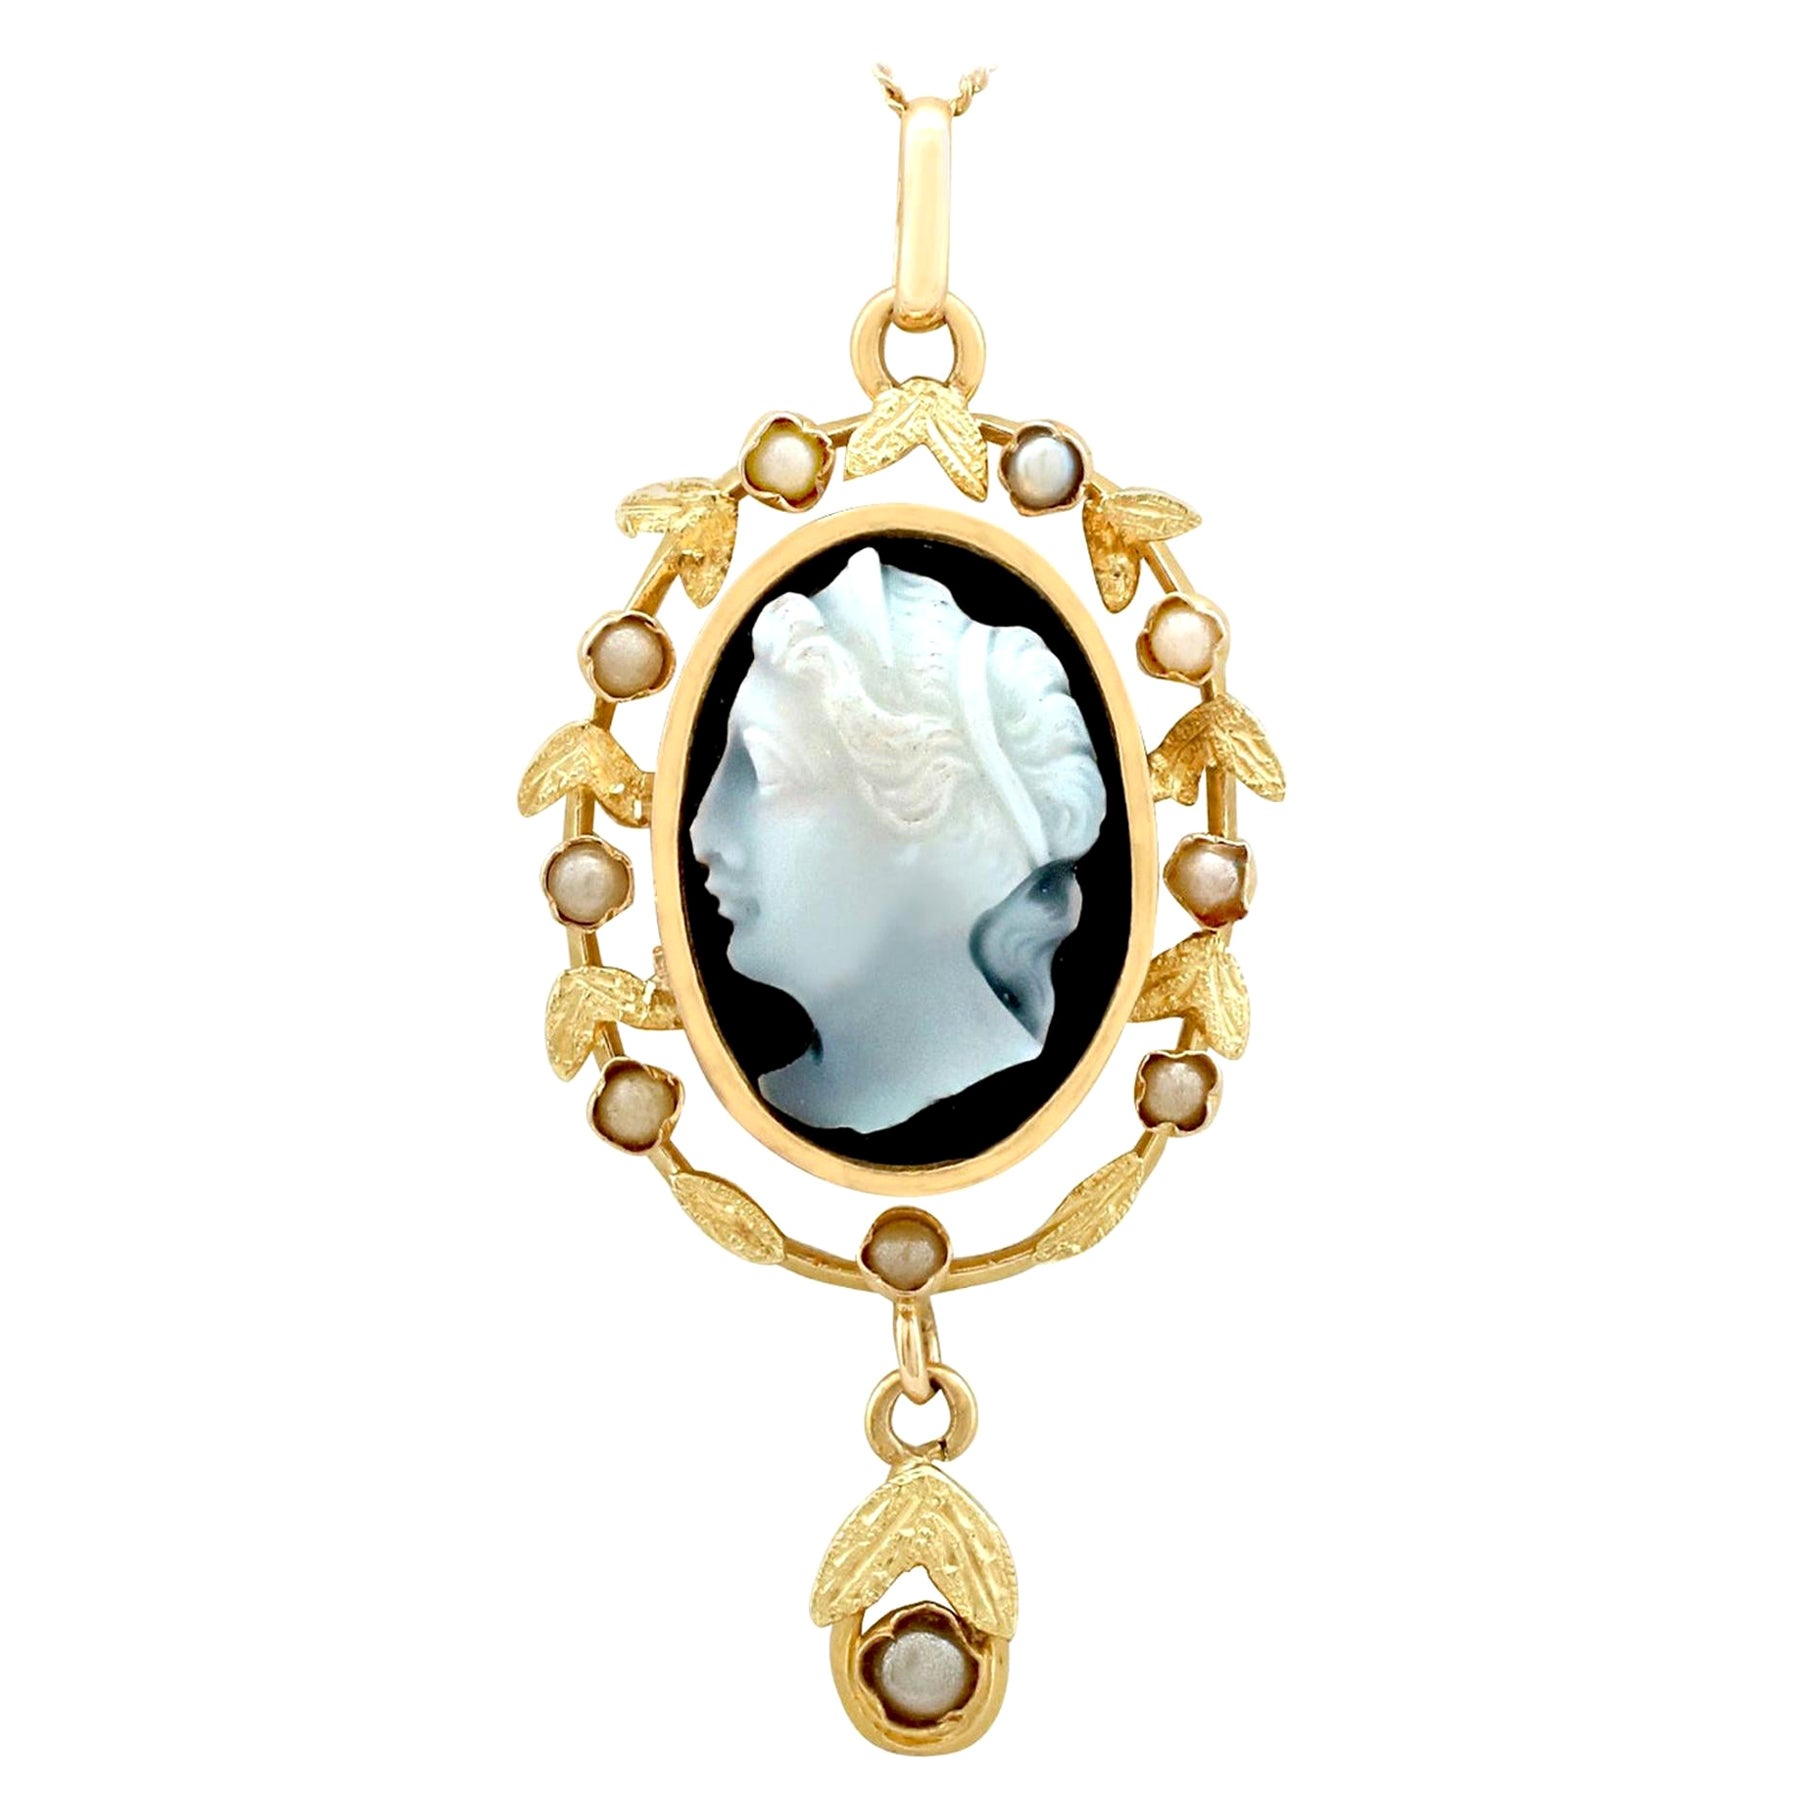 Antique 1880s Hardstone and Seed Pearl Yellow Gold Cameo Pendant